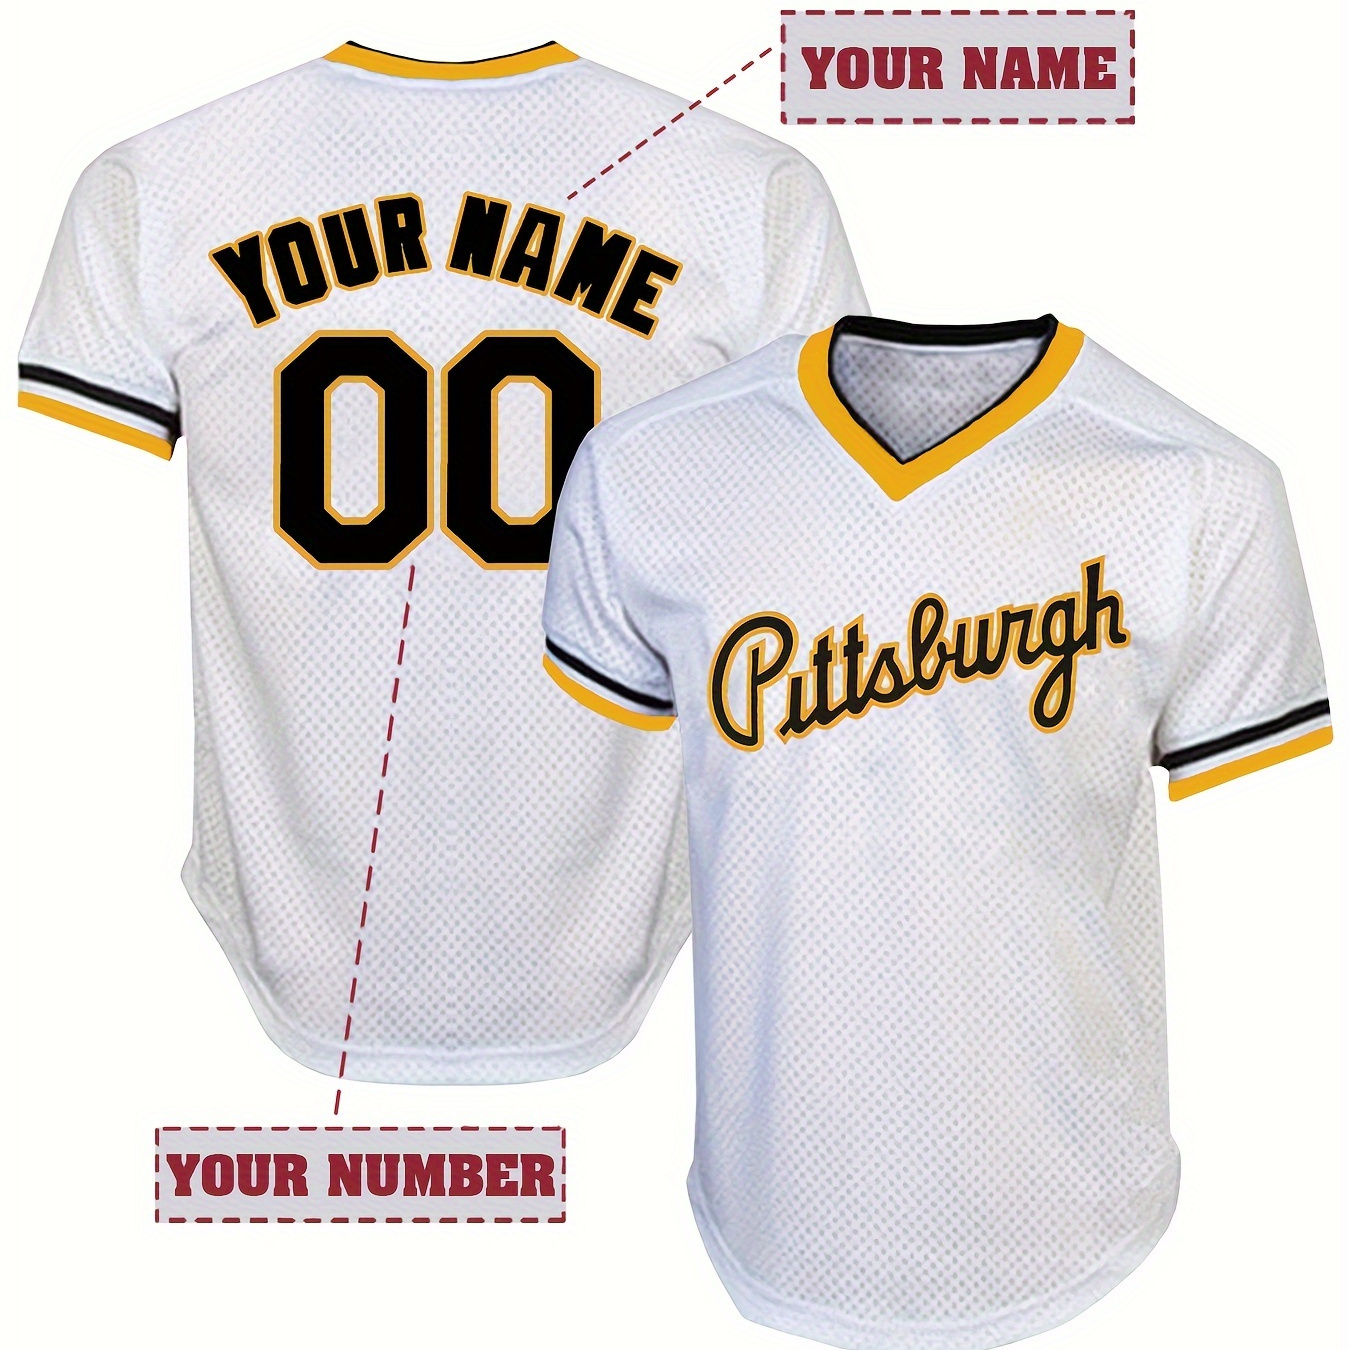 

Customized Name And Number Design, Men's Pittsburgh Embroidery Design Short Sleeve Loose Pullover V-neck Baseball Jersey, Sports Shirt For Team Training